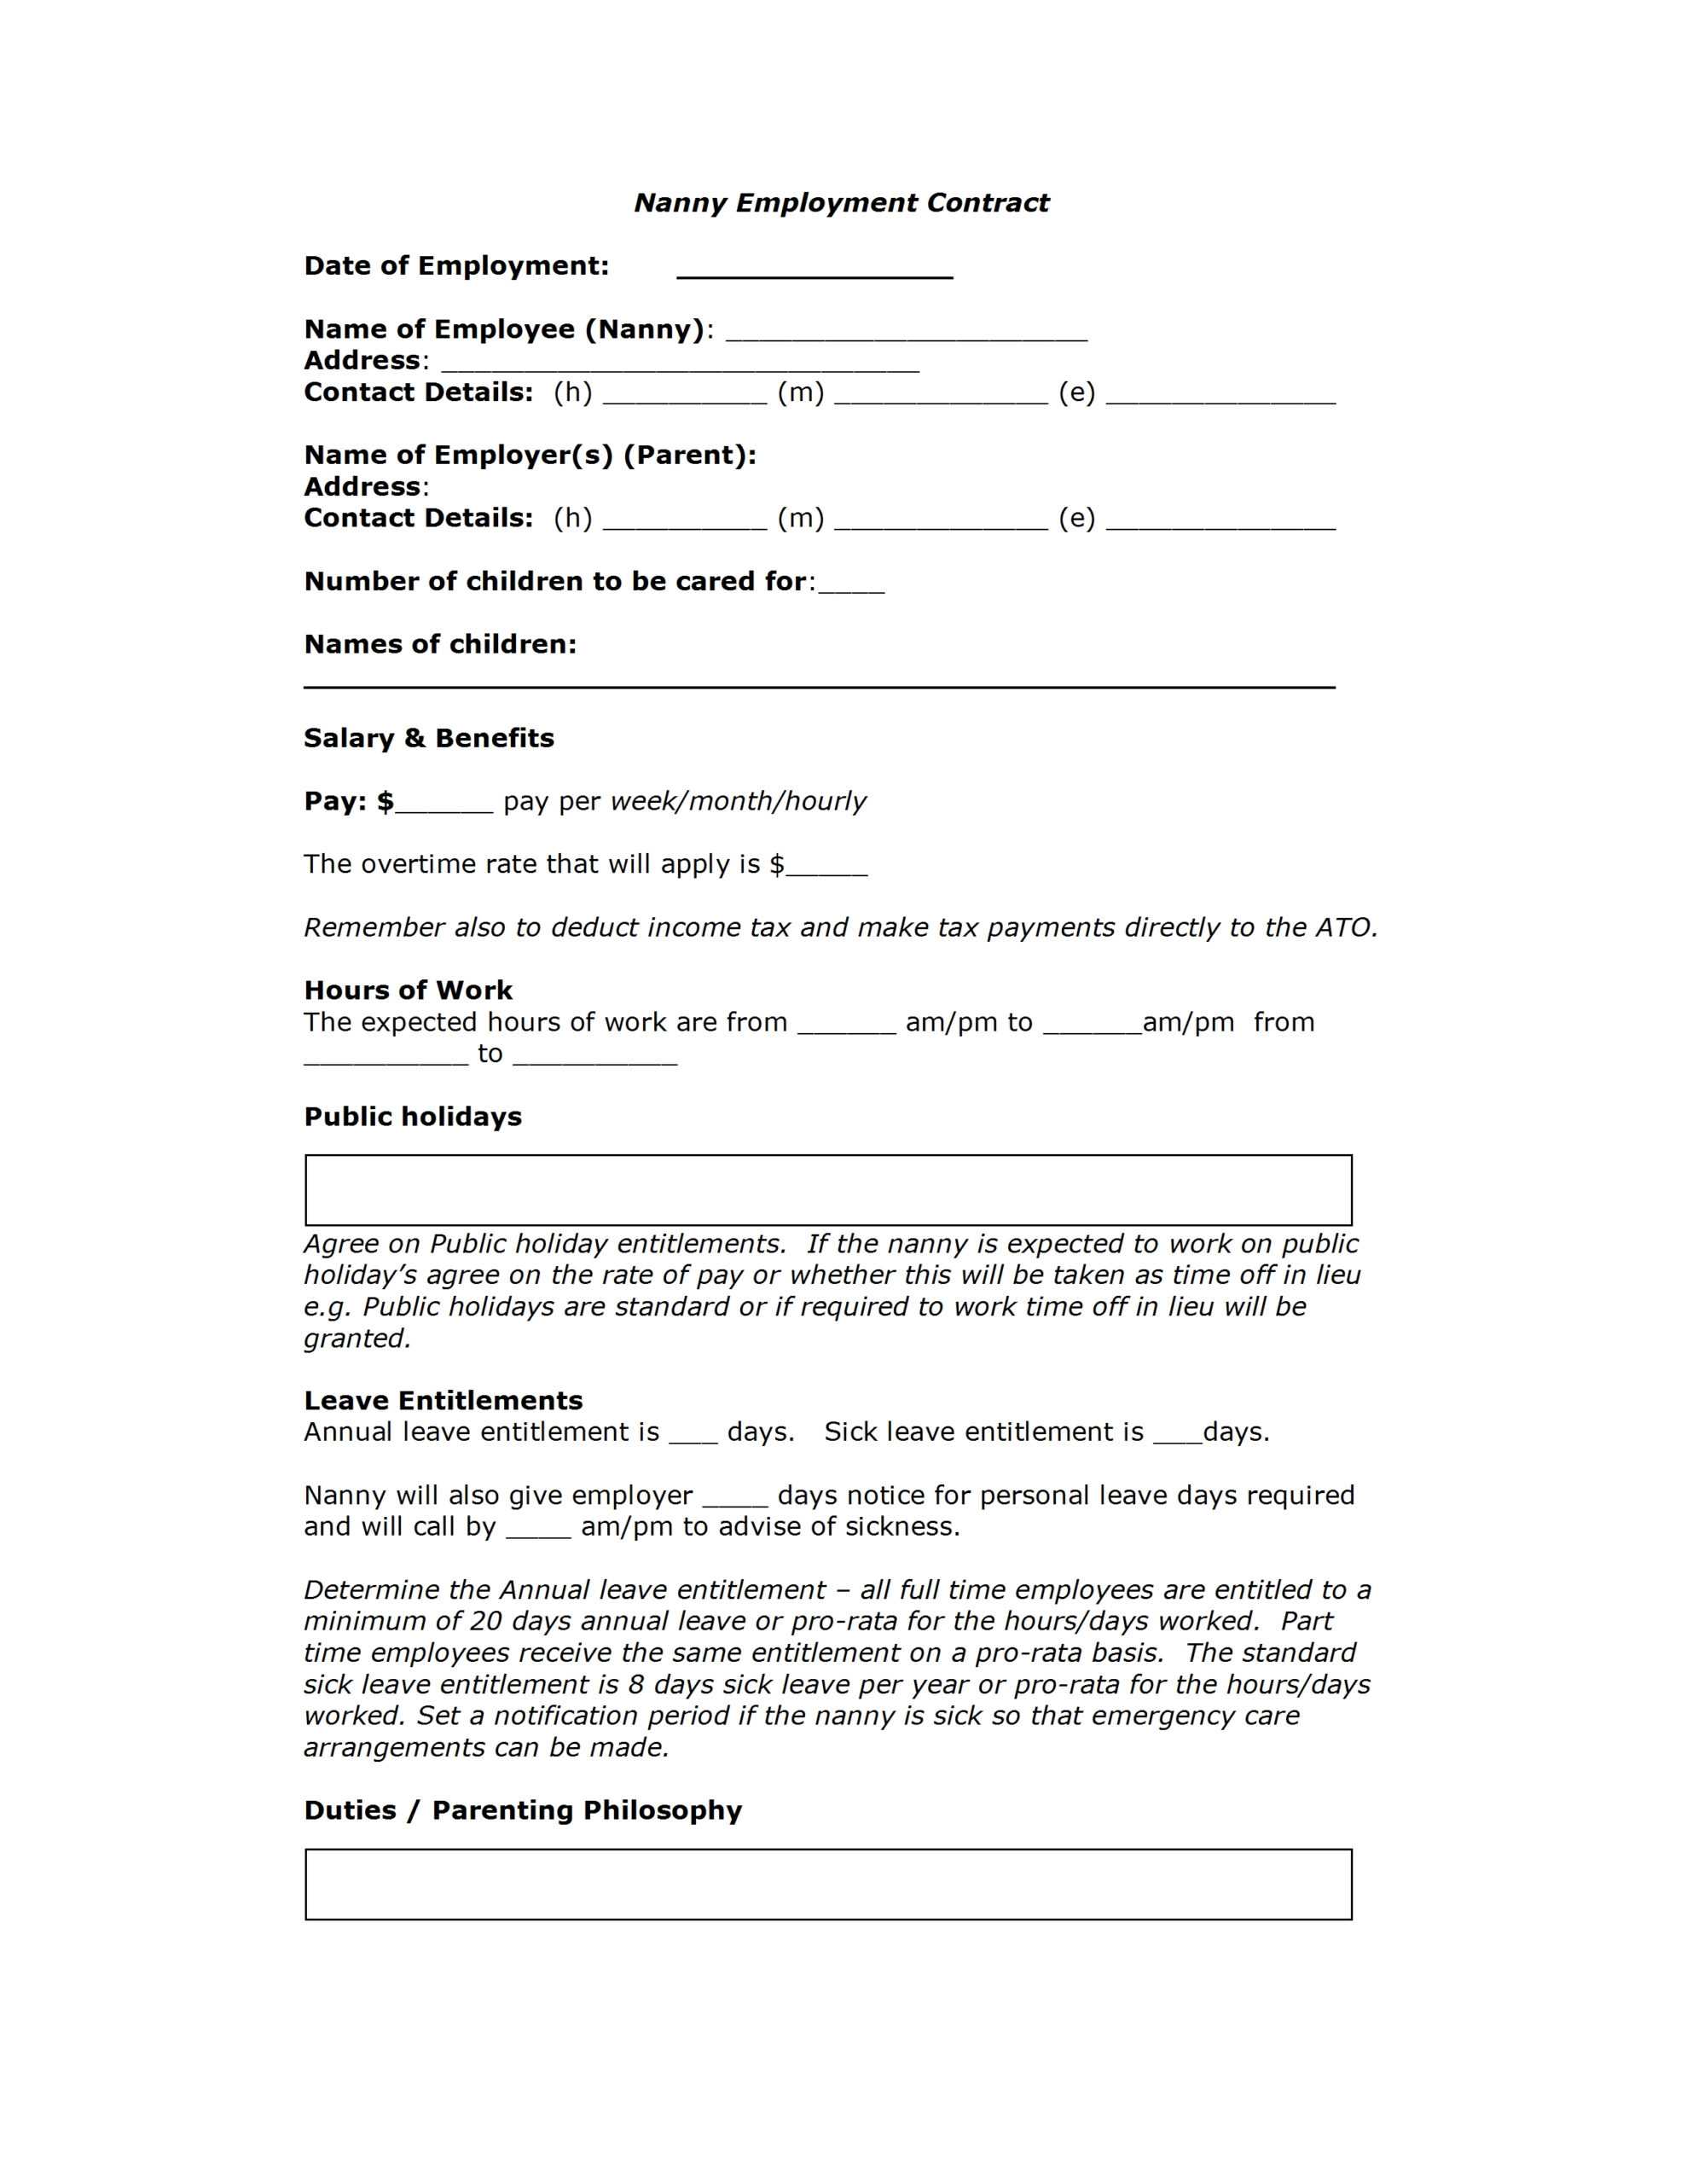 Contract Template For Nanny | Professional Resume Cv Maker With Nanny Contract Template Word